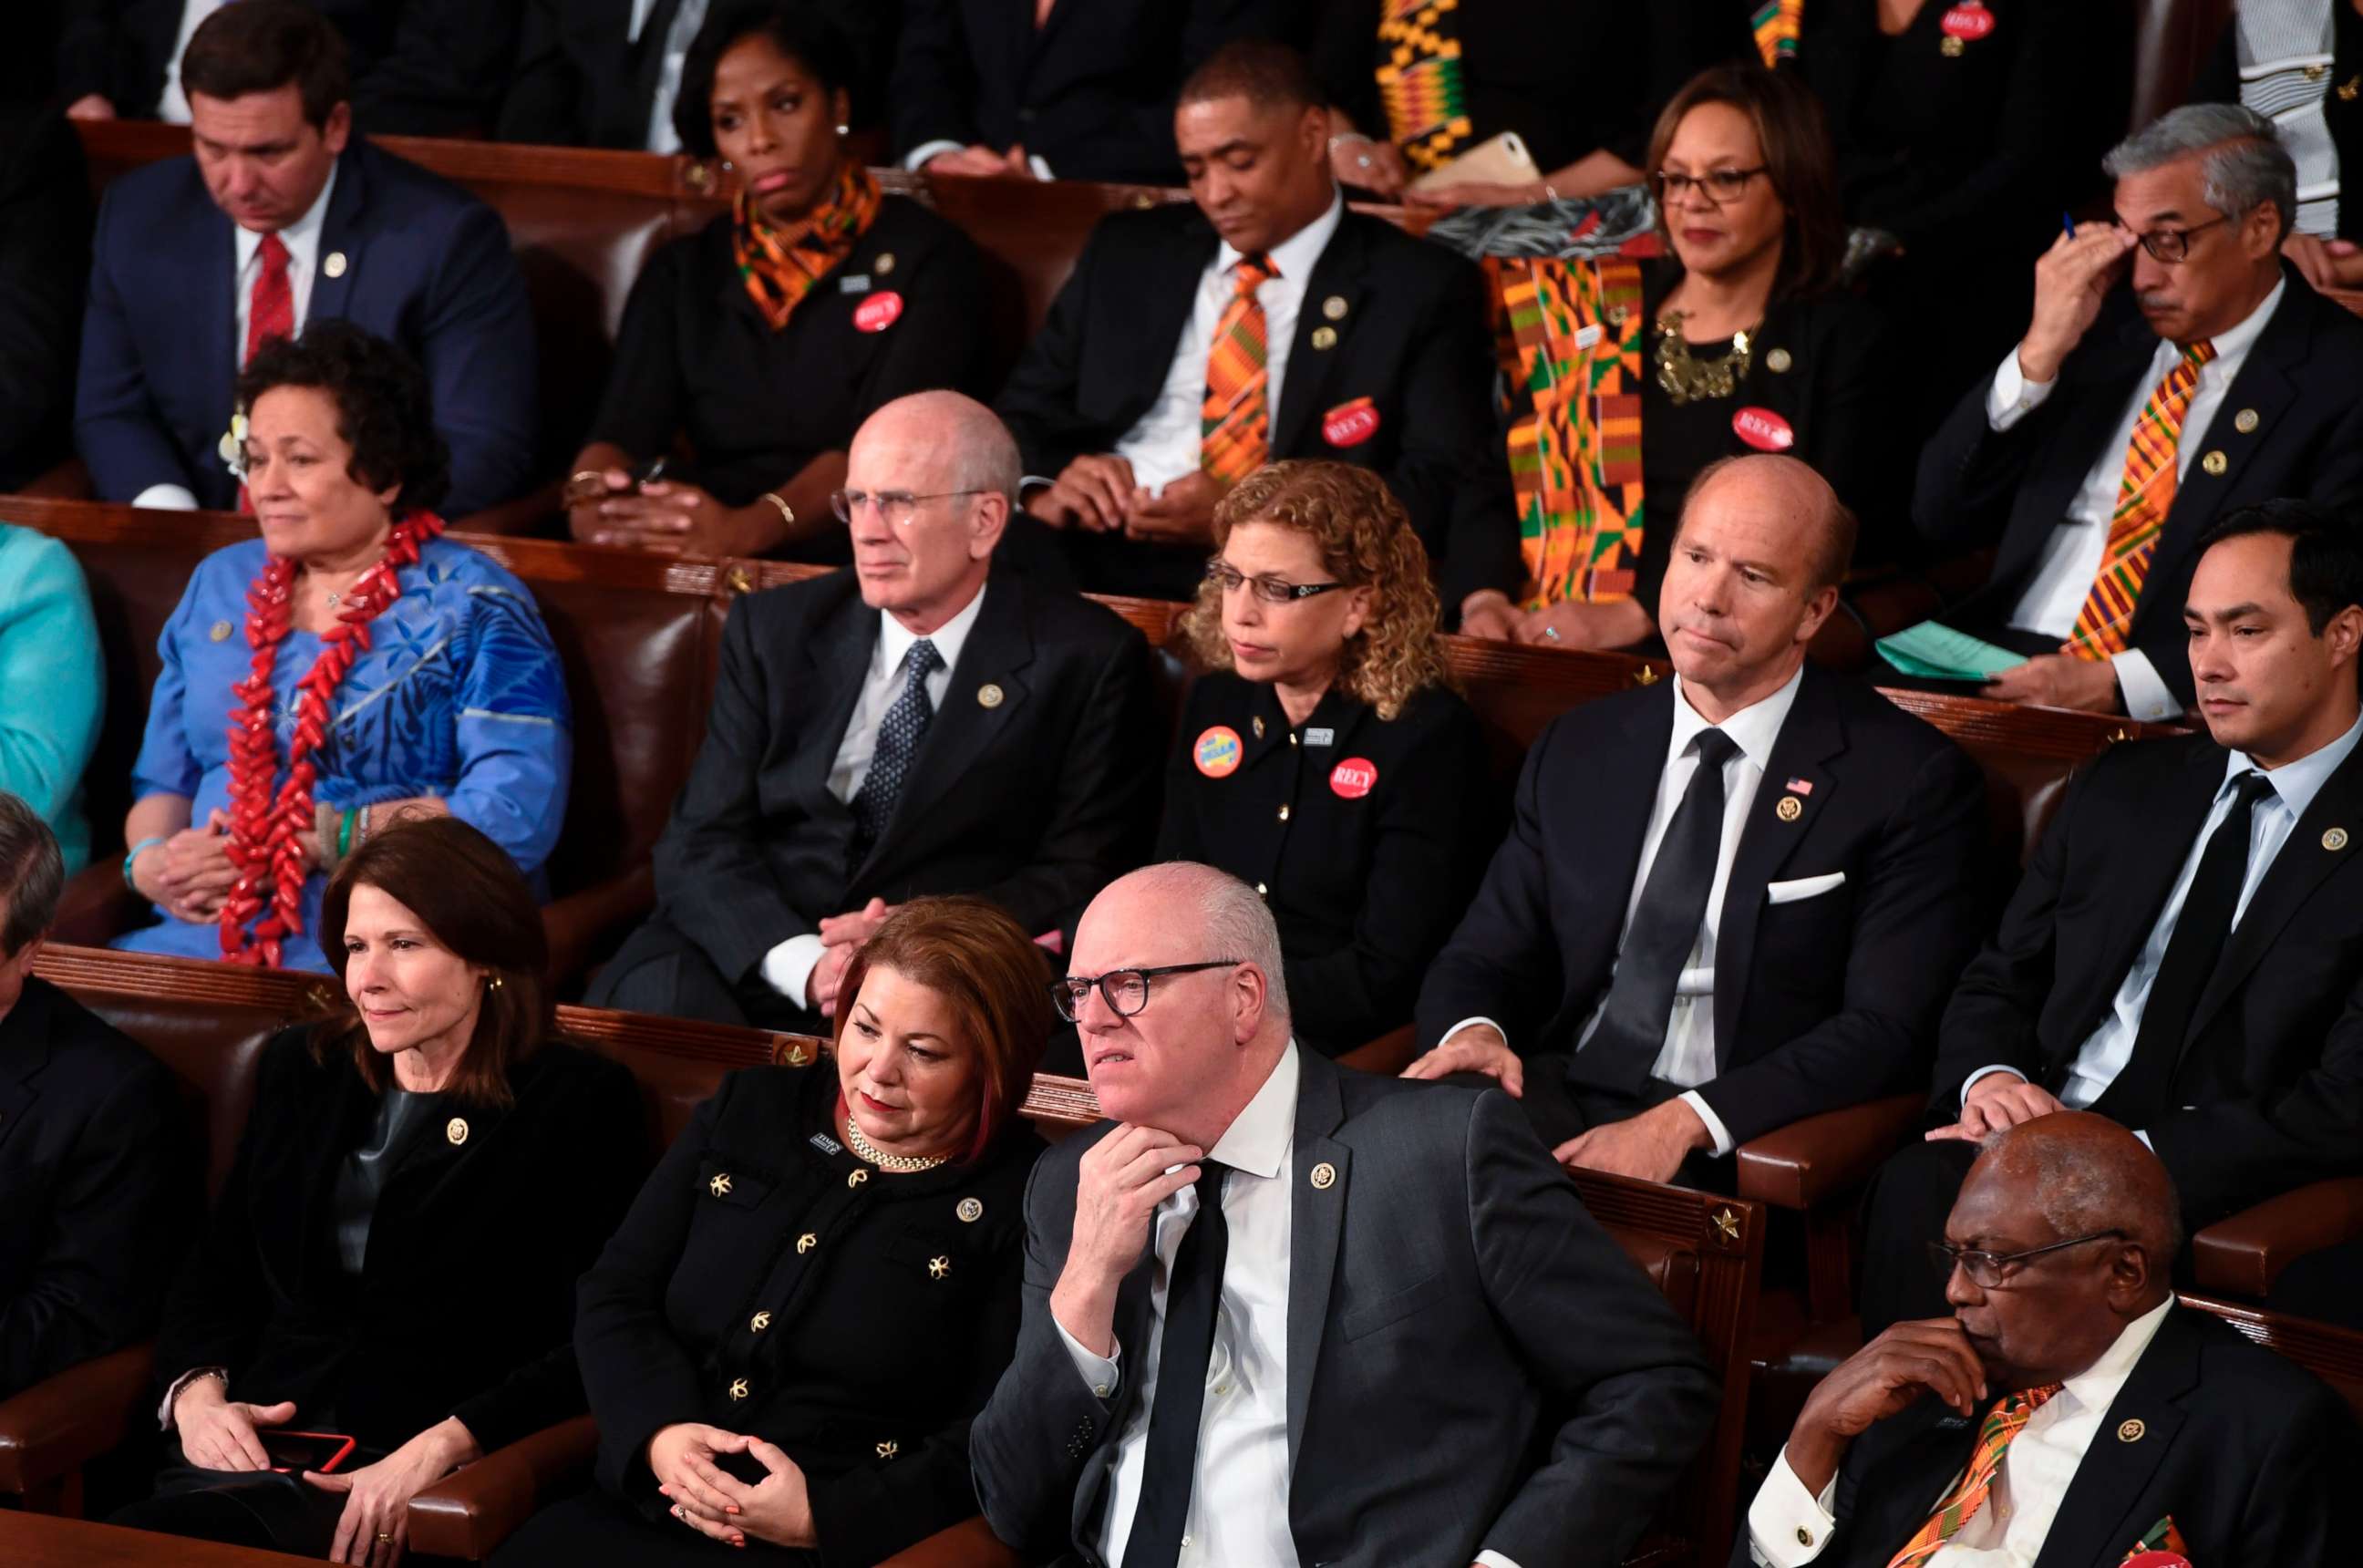 PHOTO: Democratic Senators, House representative, and guests sit and look on as President Donald Trump delivers the State of the Union address at the US Capitol in Washington, Jan. 30, 2018.